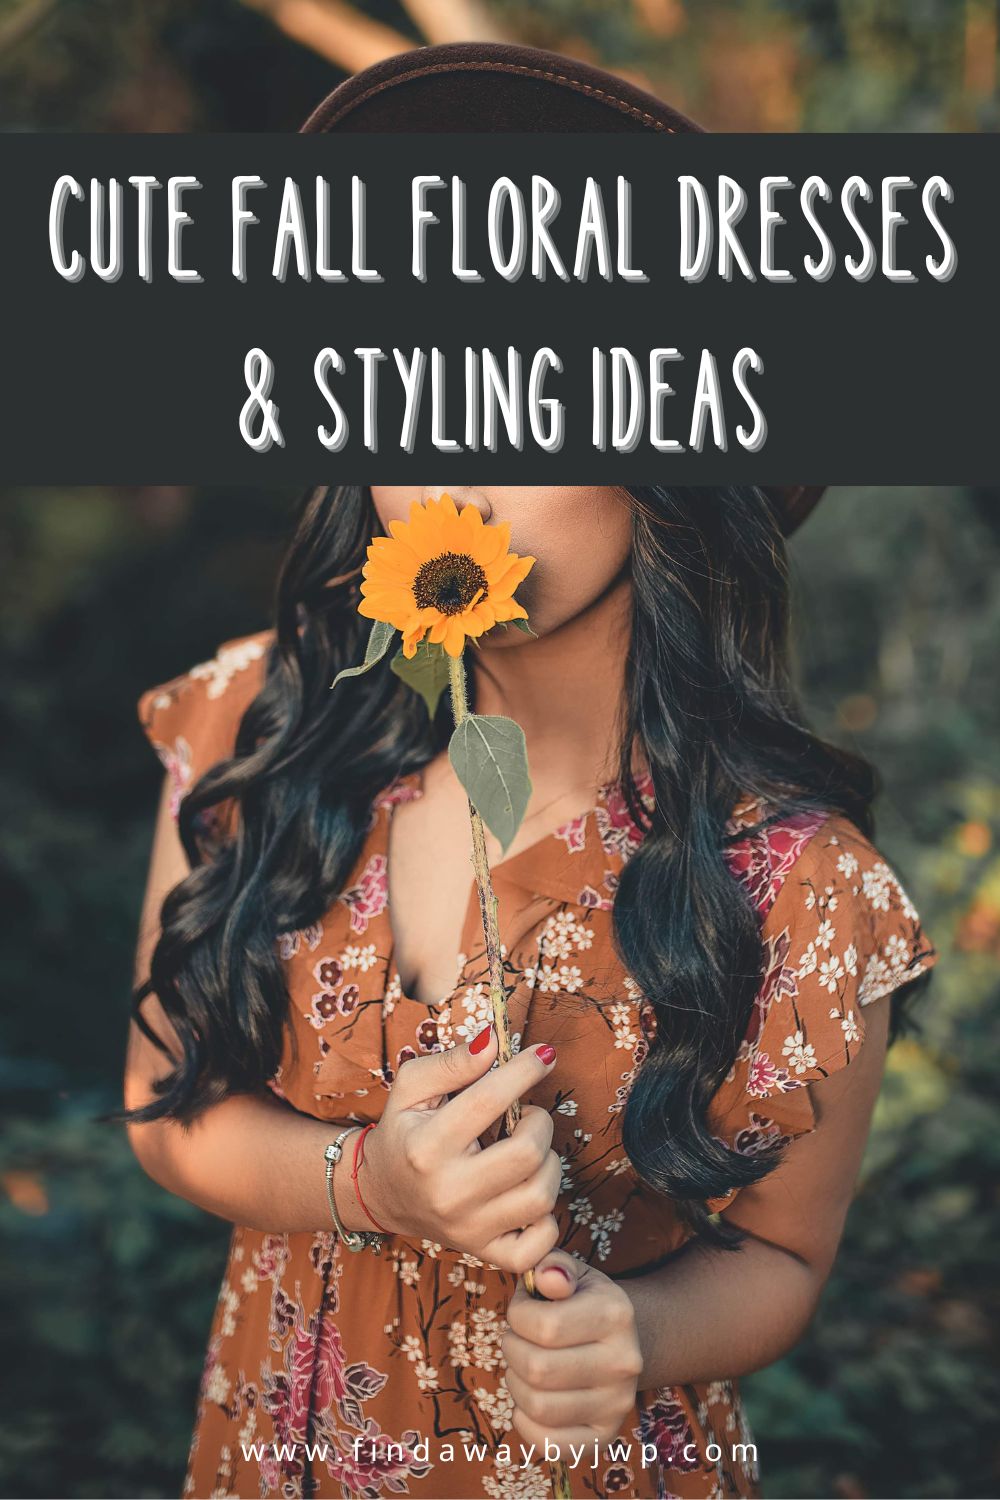 Fall floral dress styling ideas - Find A Way by JWP